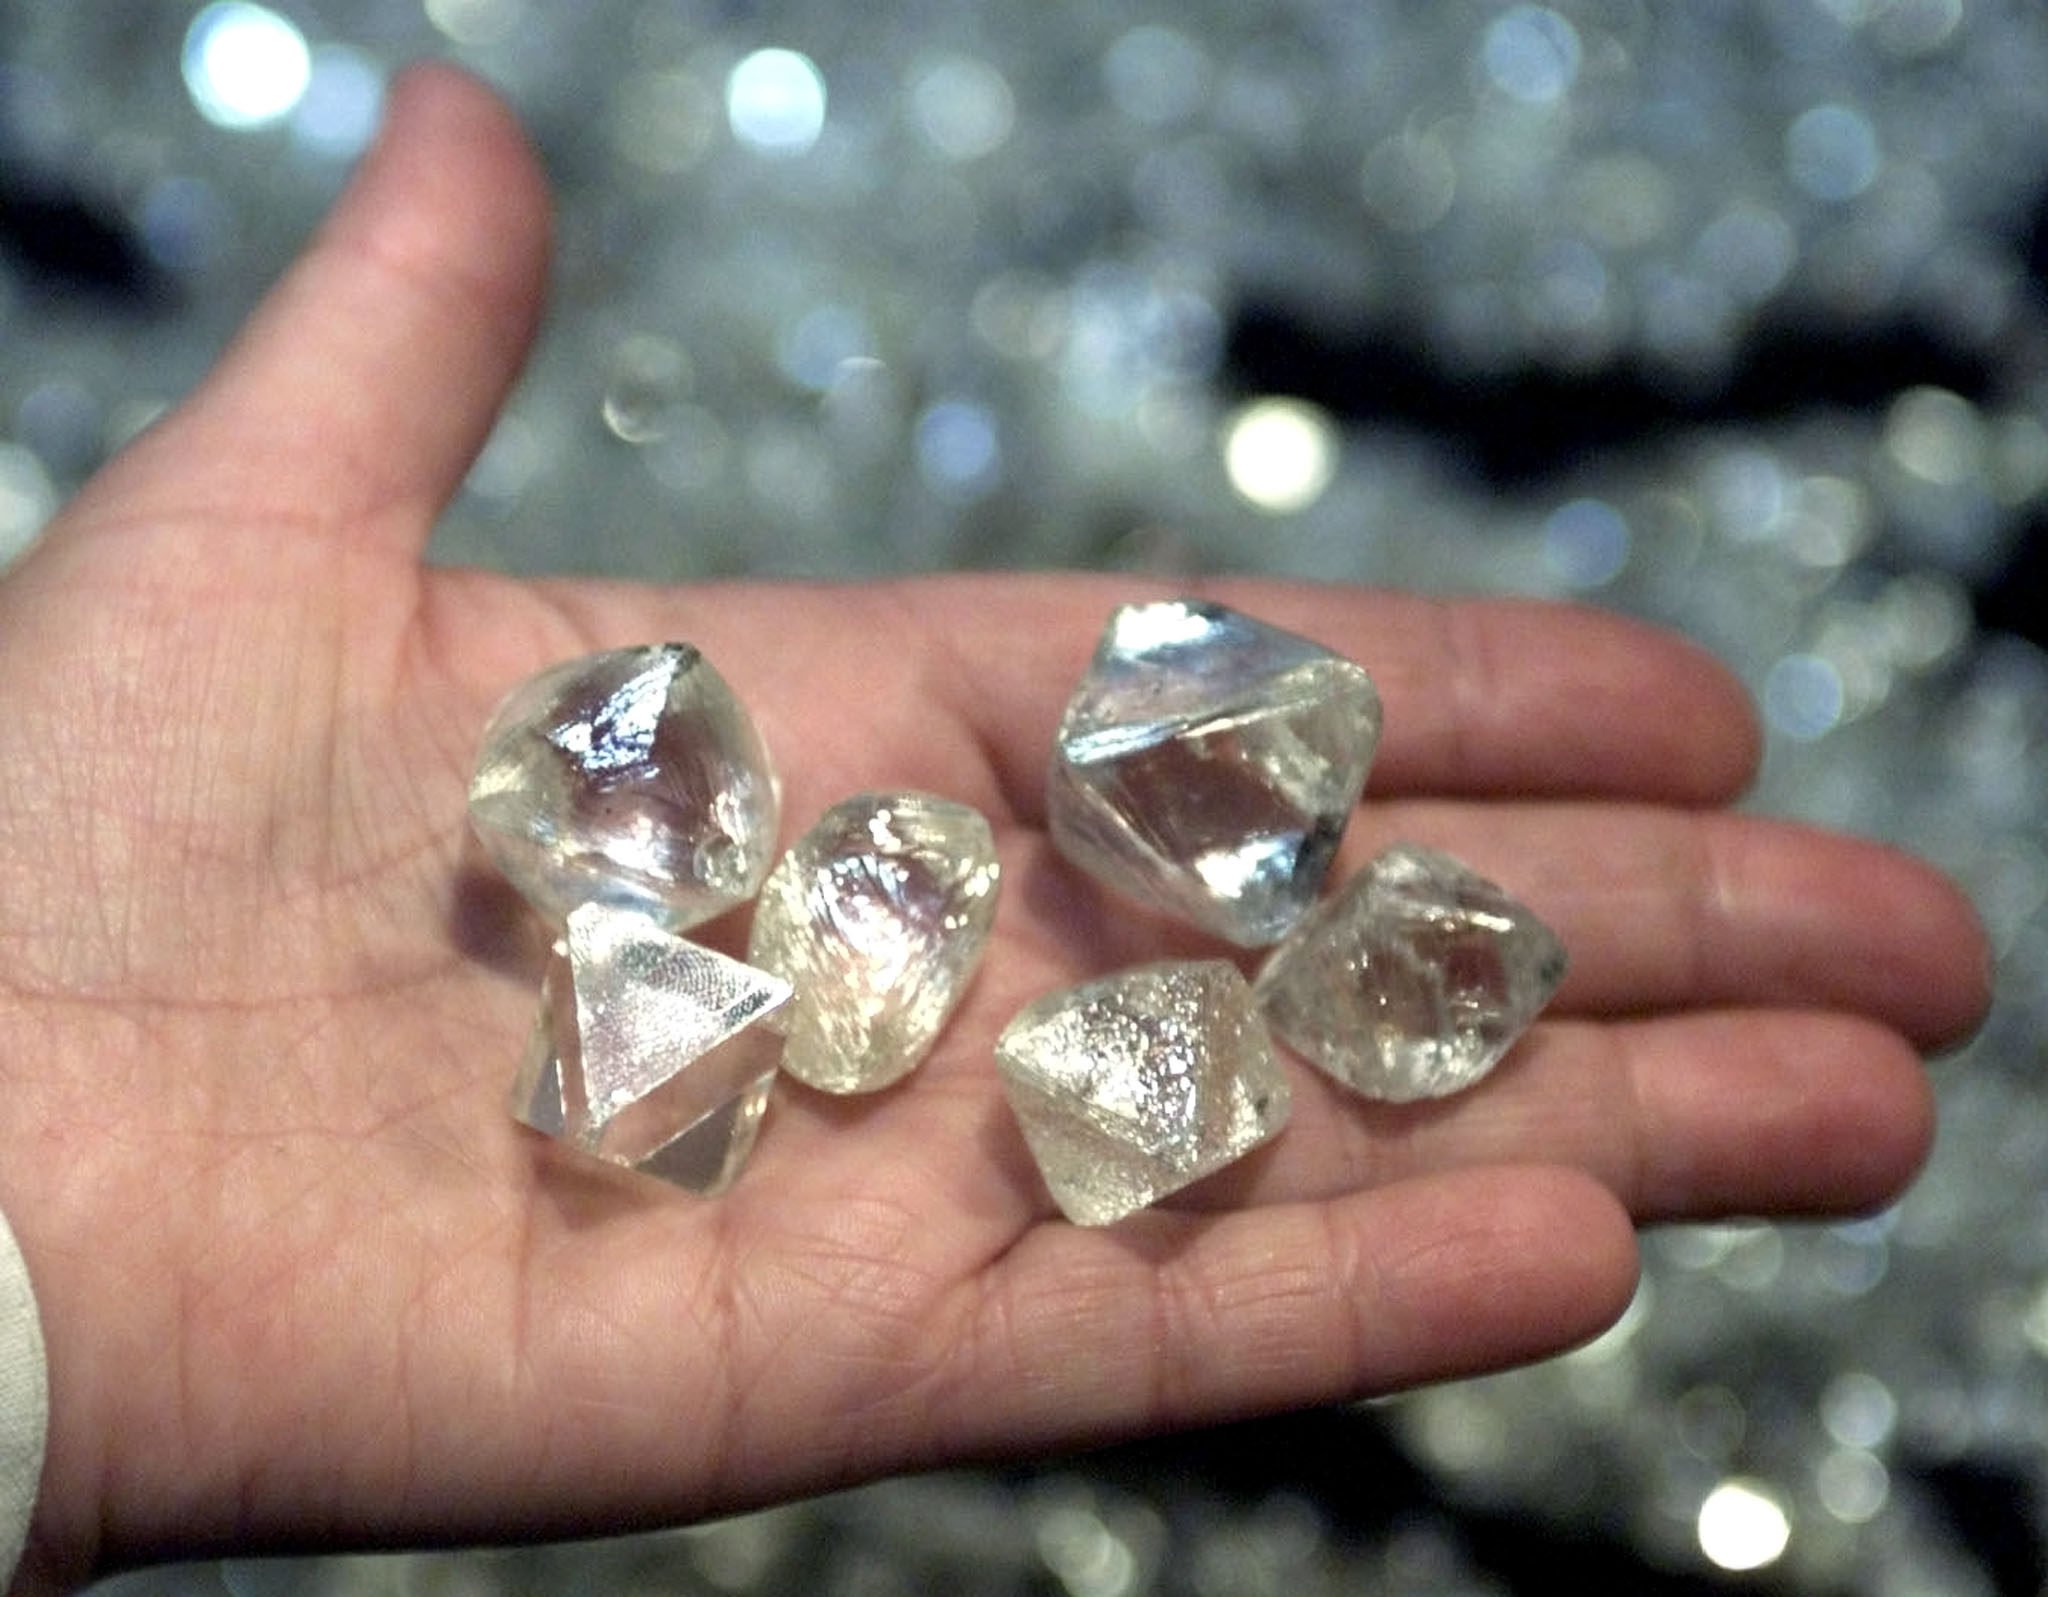 The most precious of the stolen jewels, none of which are pictured, was a rare 50-carat blue diamond. Photo: Reuters